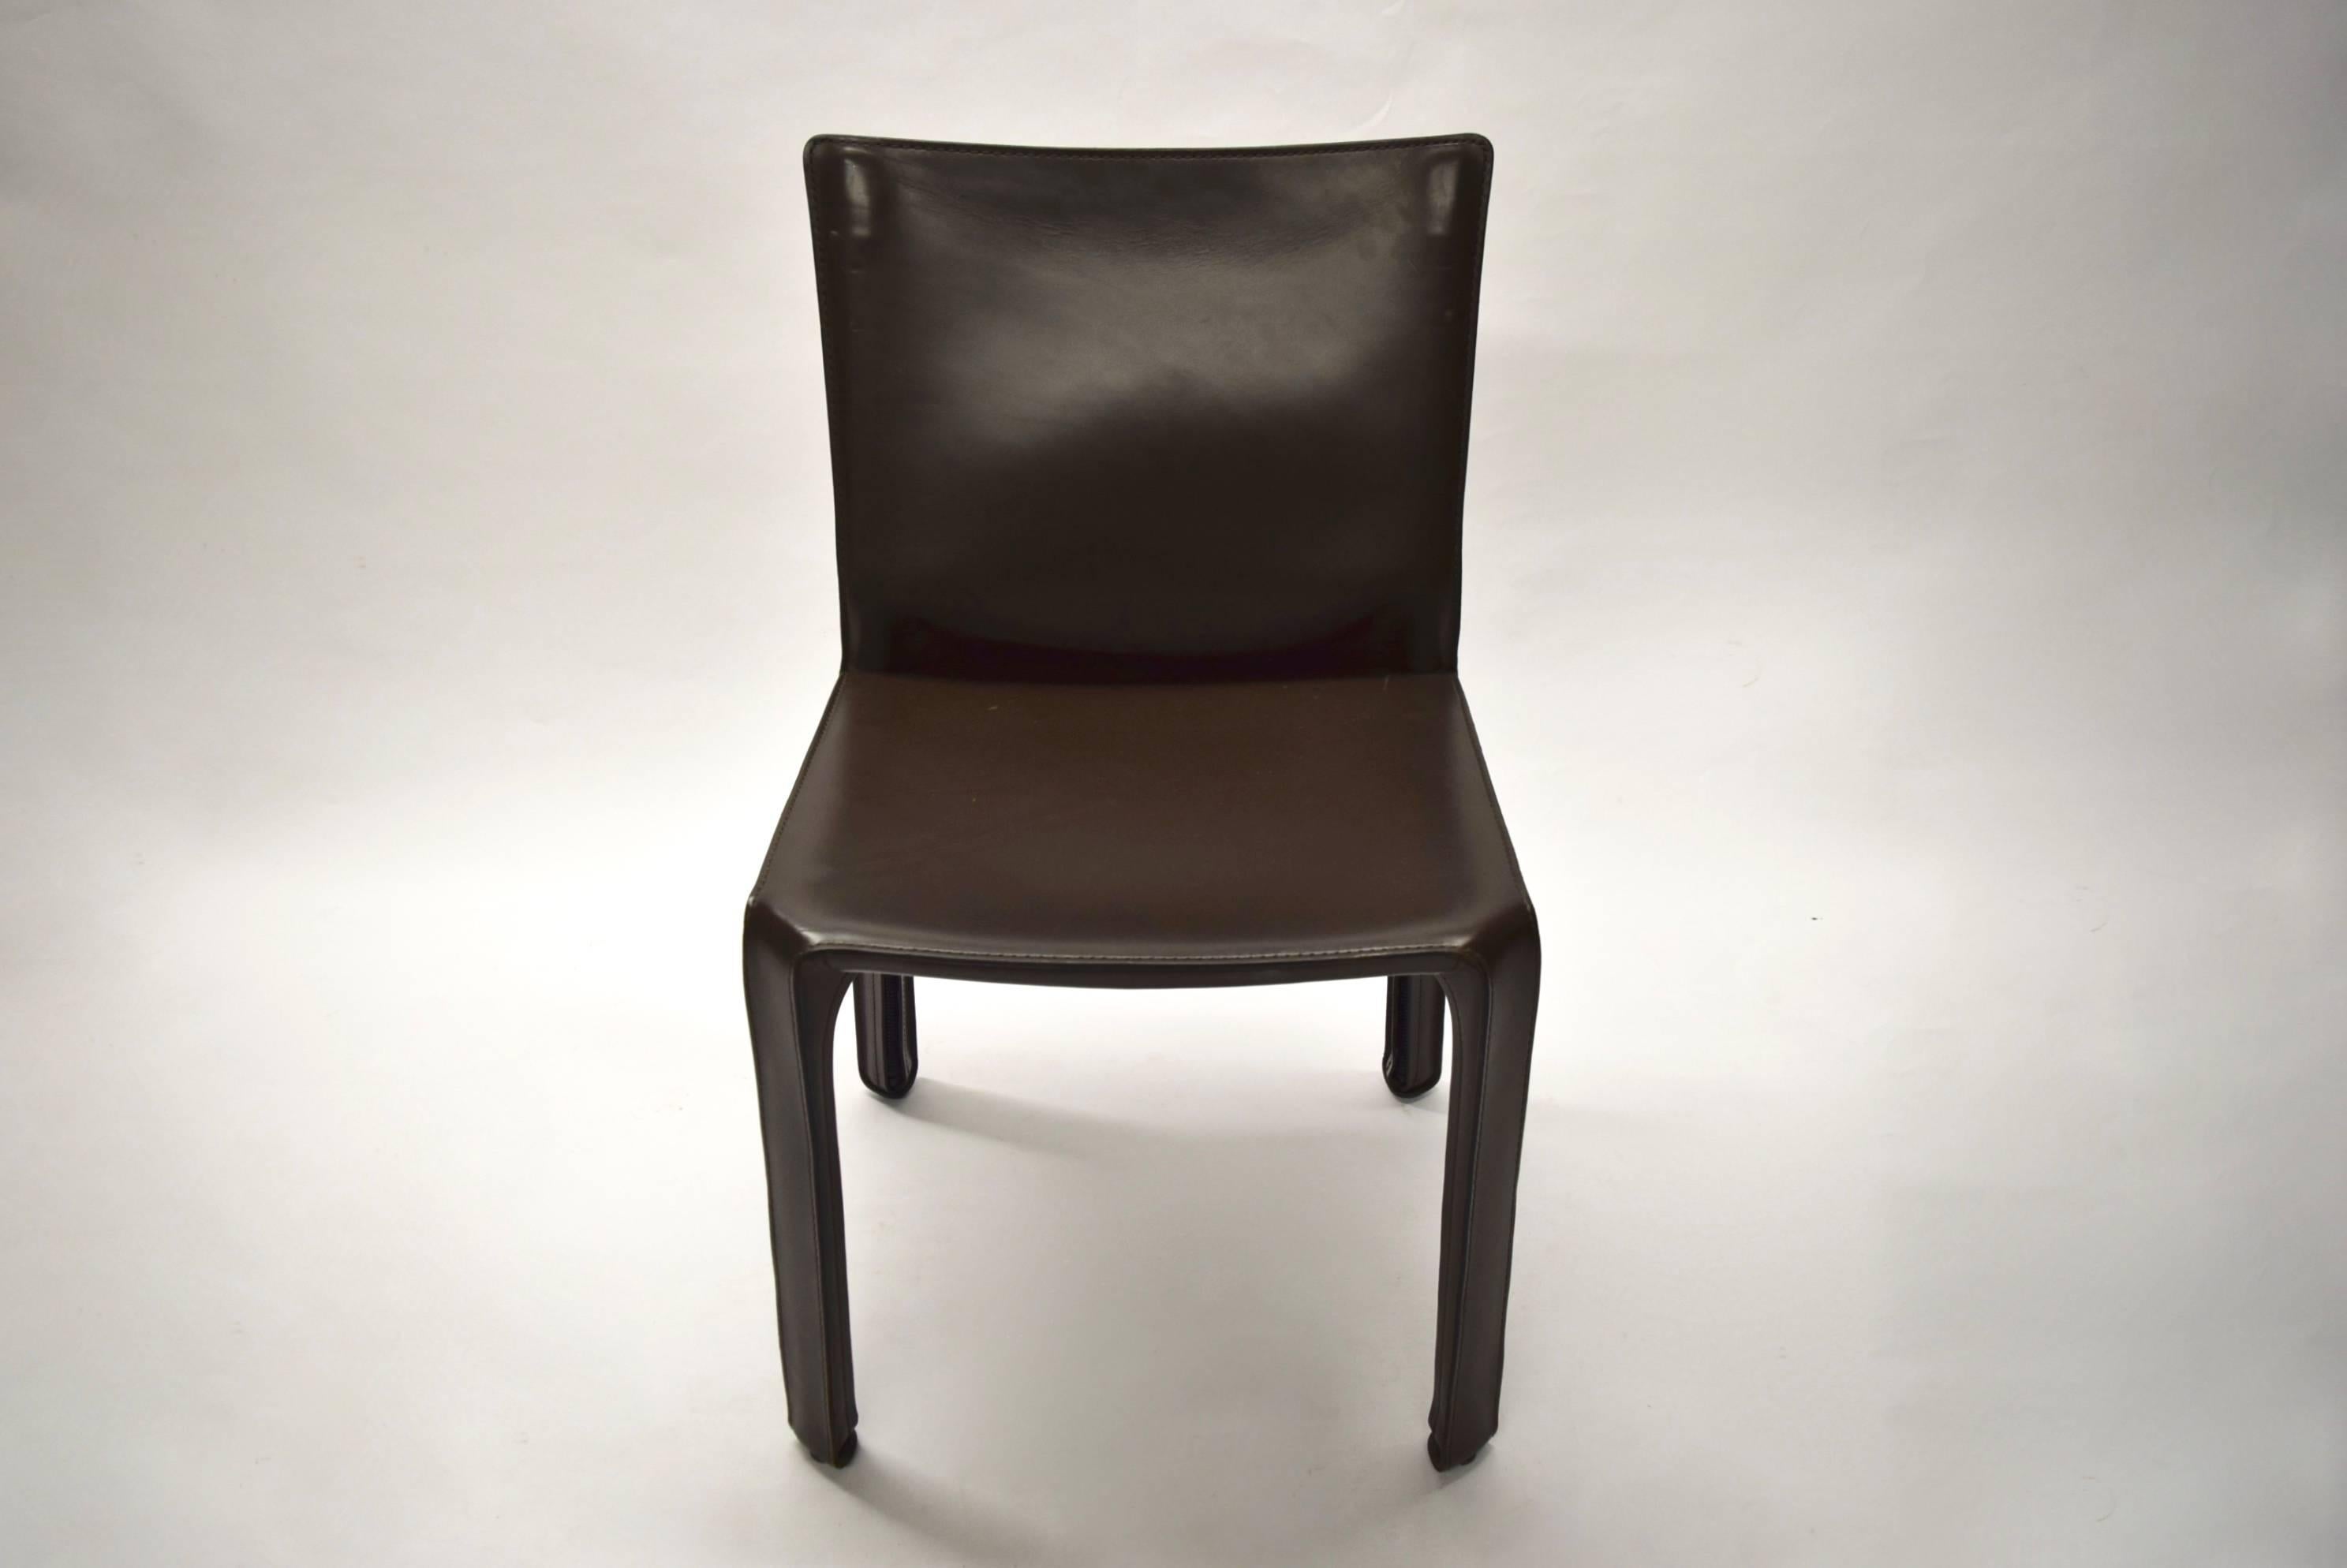 Set of eight dining height CAB armless chairs in brown leather all with original markings an all in excellent condition. The chair is steel covered in leather. The seat cover is applied using zippers that are not visible.


